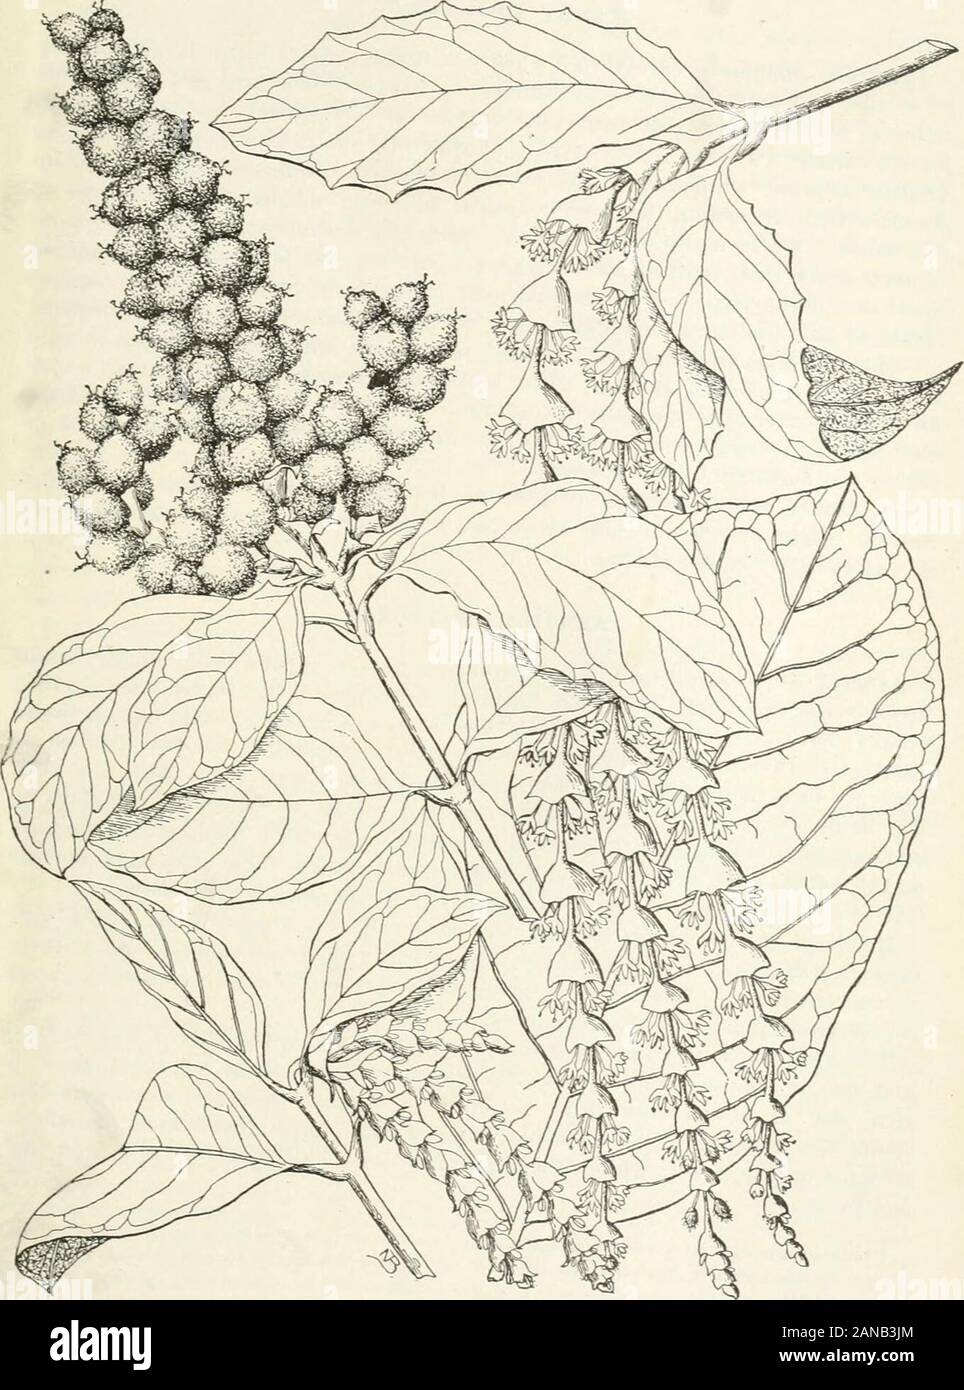 Forest trees of the Pacific slope . y-like, with a thin brittle case cfivering an acid, slightly bitter,purplish pulp, in which there are 1 or 2 seeds. Male clusters of flowers (fig.199) are from 3 to 5 inches long and fringe-like. Wood, not used conunerciallybecause of its rarity. It has not been studied fully, but is known to he hciivy,dense, and hard. As a shrub quinine bush assists, with manzanita and ceanothus brush, in maiu-taining a scanty but tenacious cover on dry, gravelly, and rocky mountain slopes.Nothing is known of its silvical characteristics as a tree in moist, rich soils. Long Stock Photo